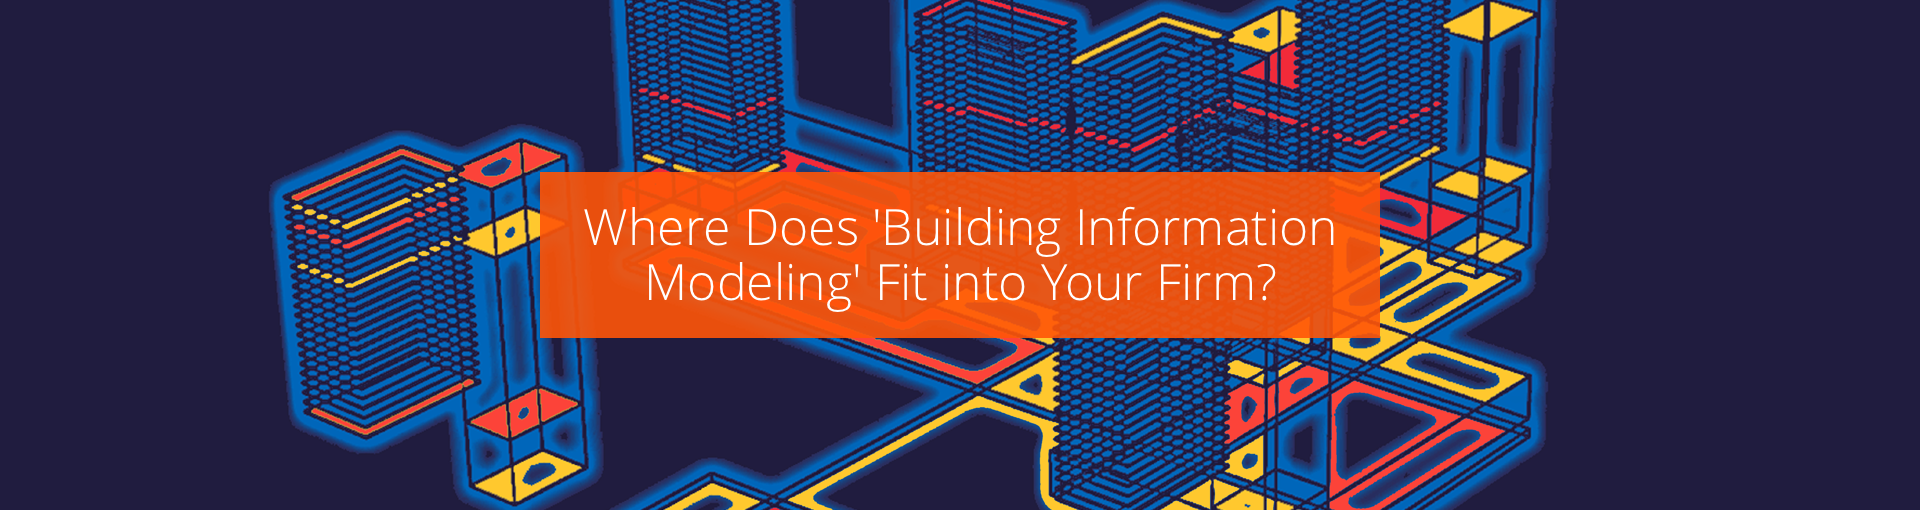 Where Does 'Building Information Modeling' Fit into Your Firm? Featured Image